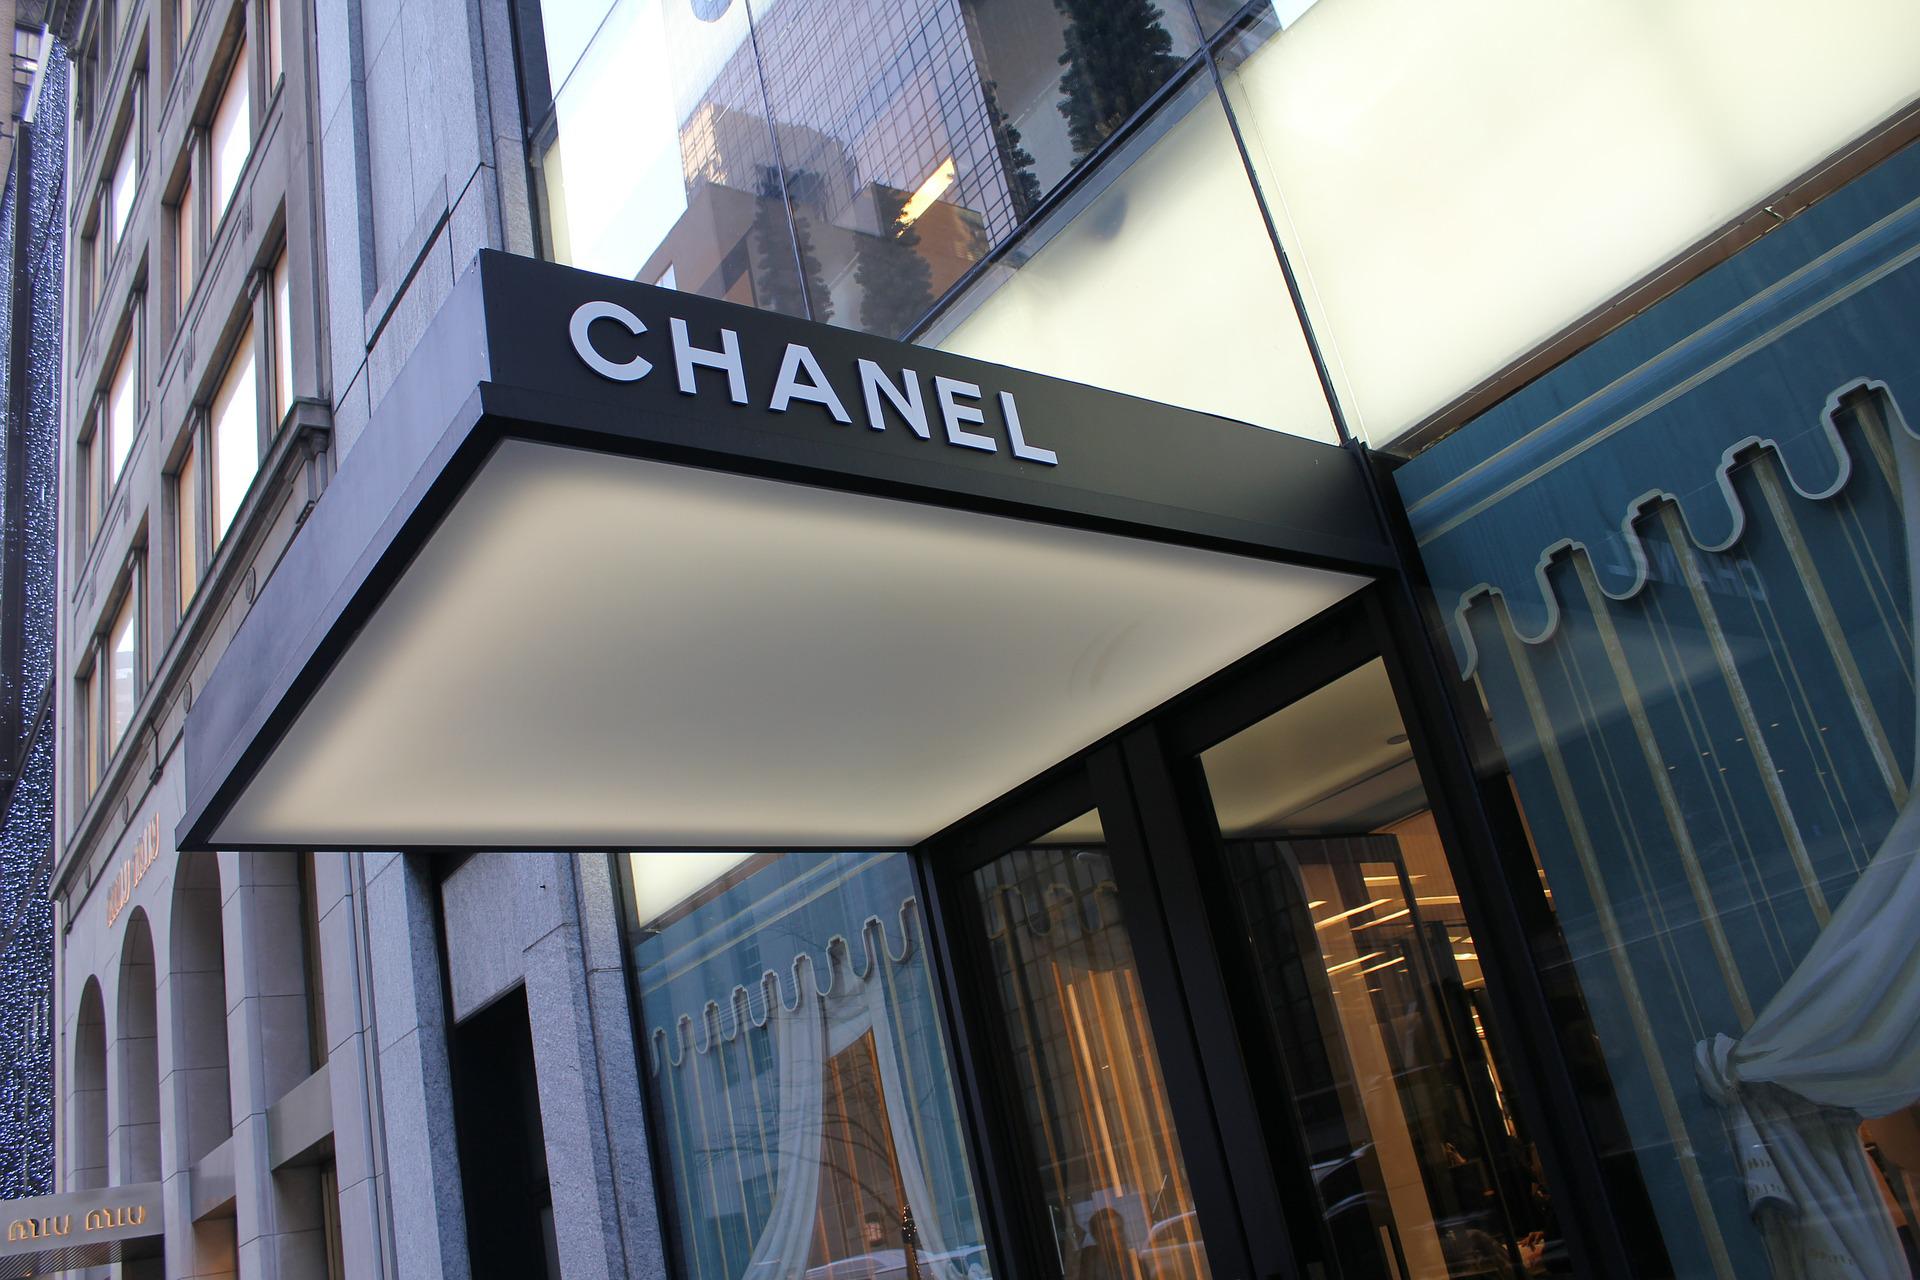 LUXURY SHOPPING IS DONE? Is shopping in luxury boutiques OVERRATED? 